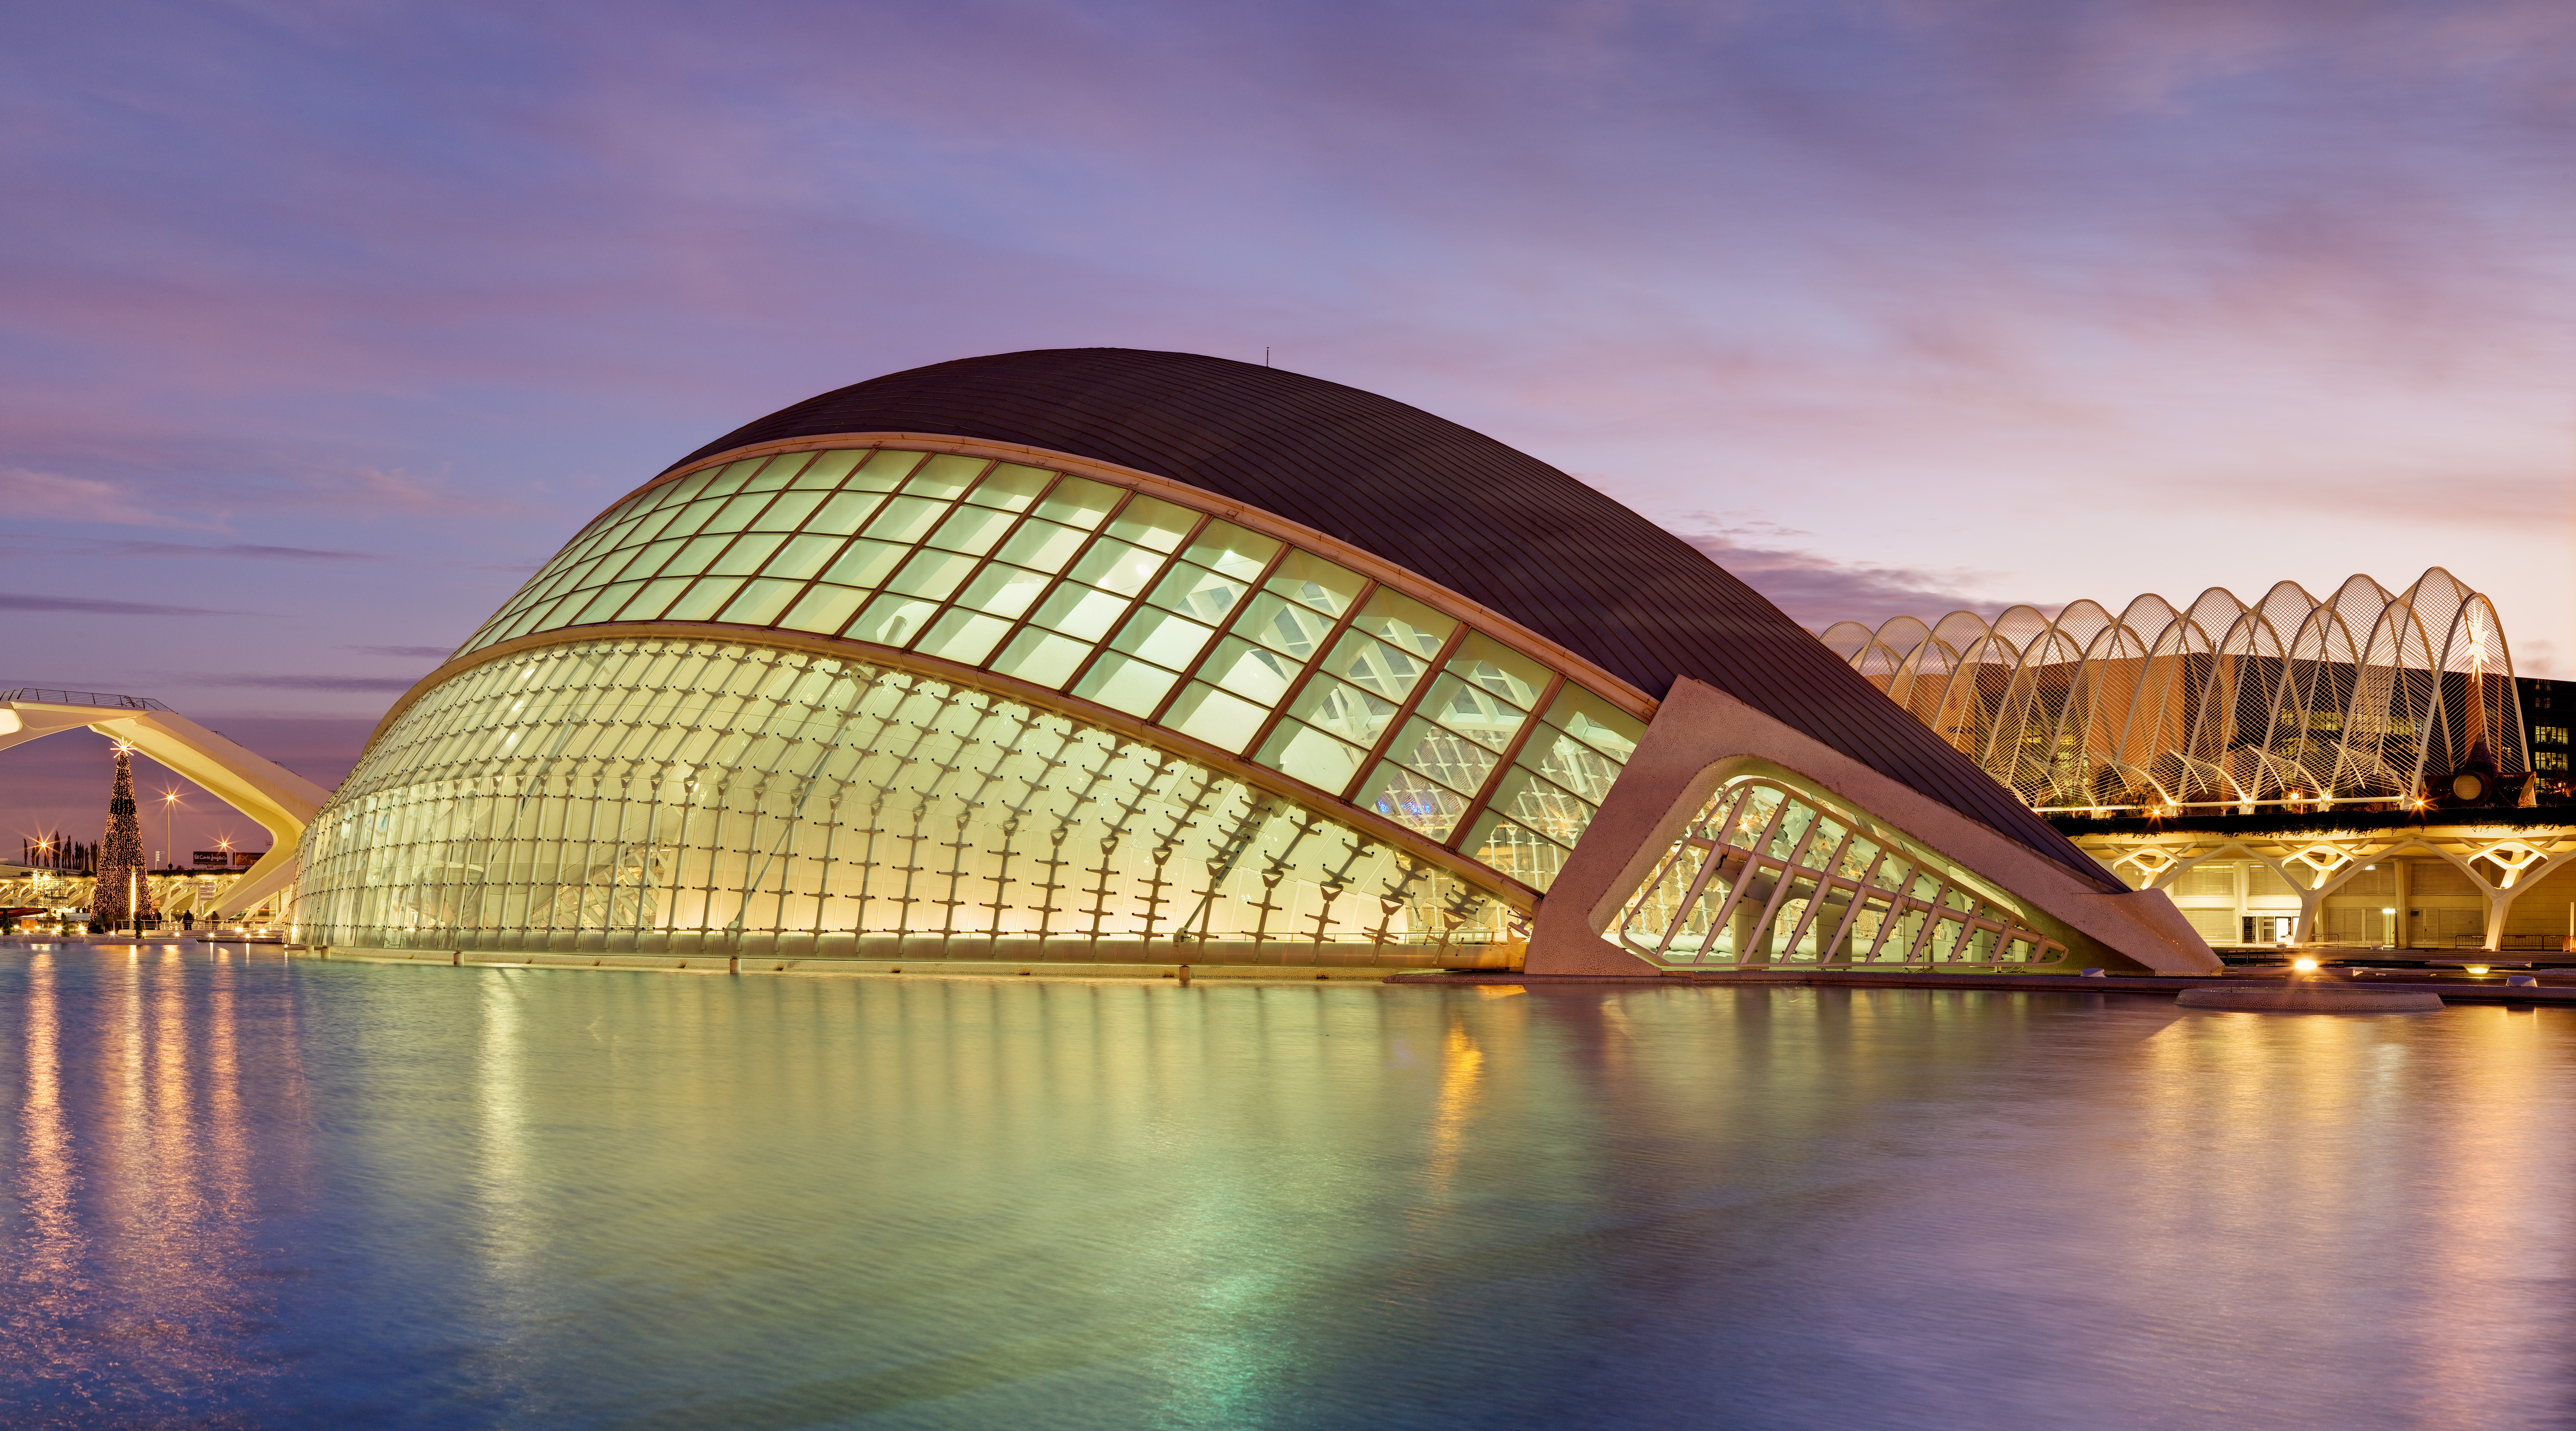 Man Made City Of Arts And Sciences HD Wallpaper | Background Image